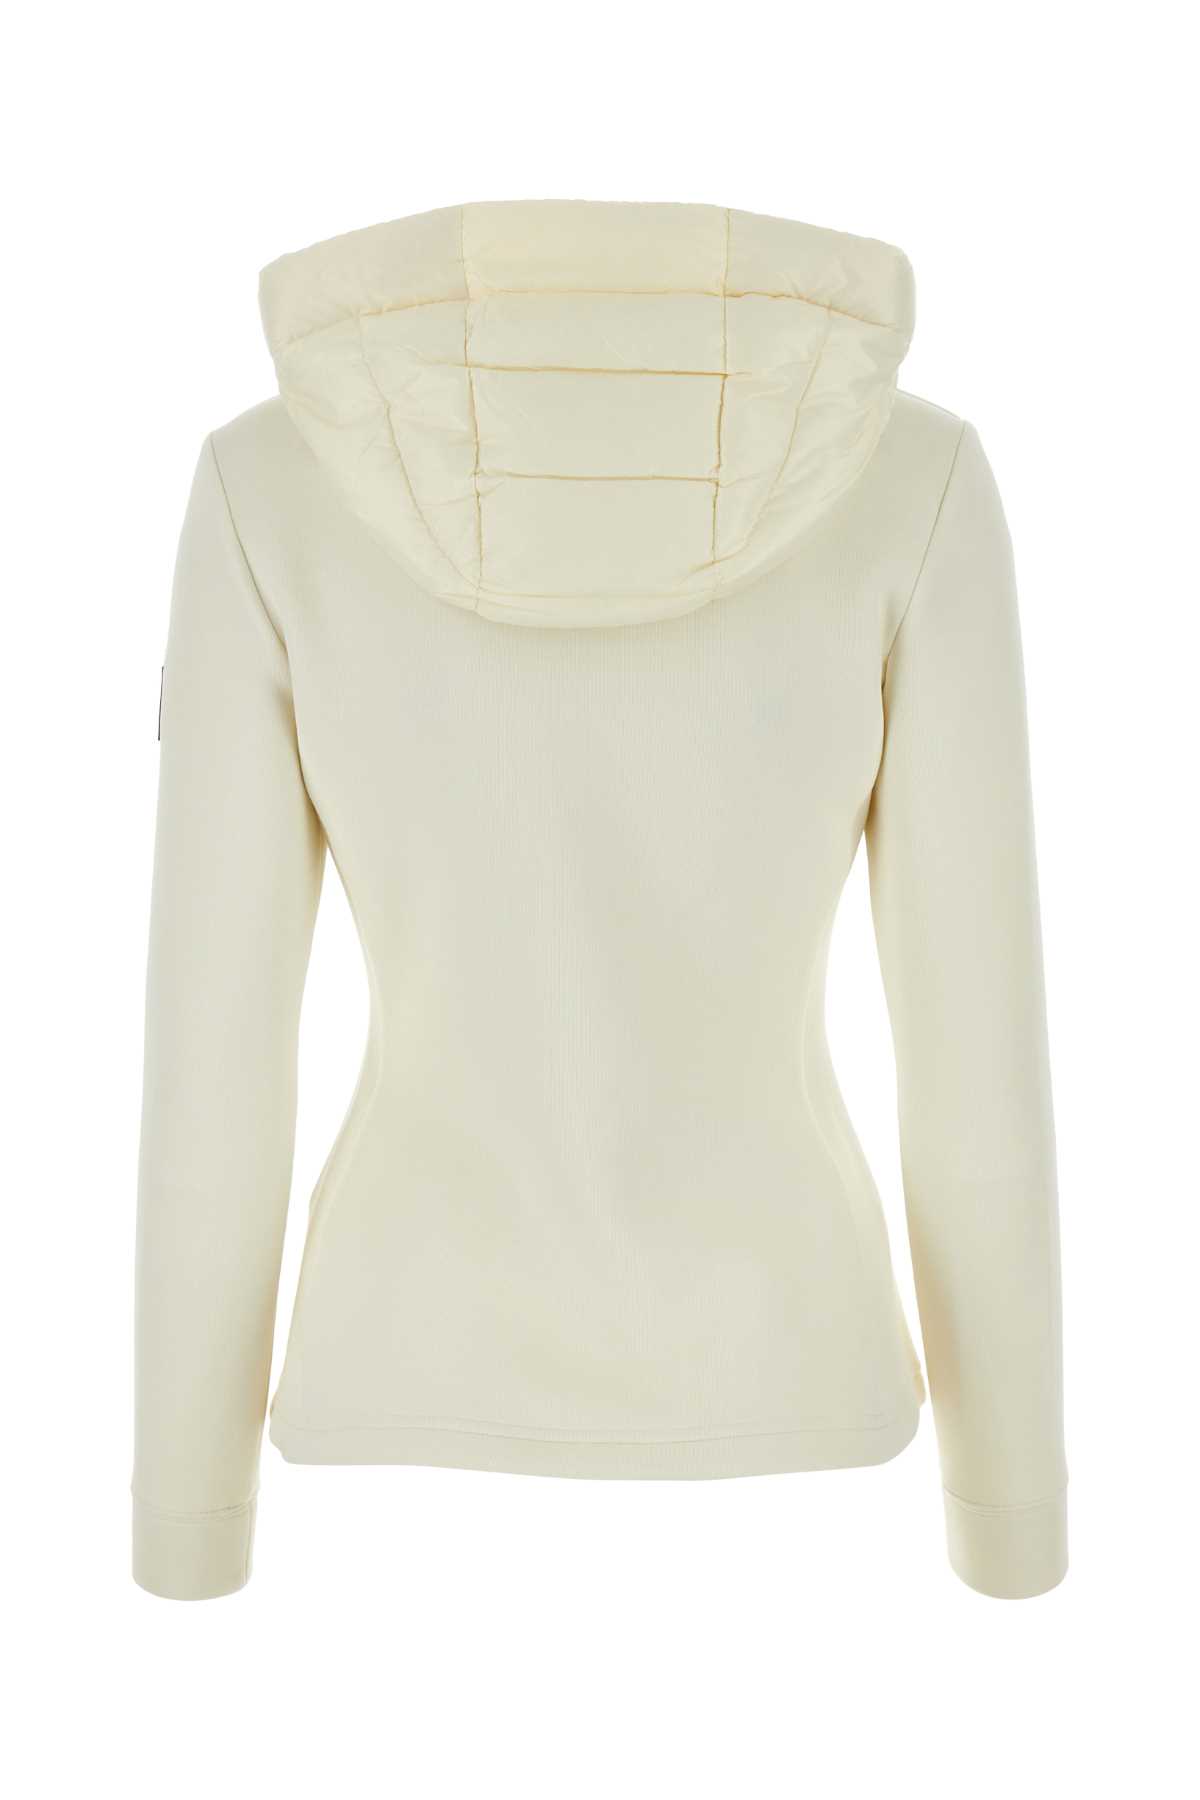 Mackage Ivory Cotton Blend And Nylon Della Jacket In Cream